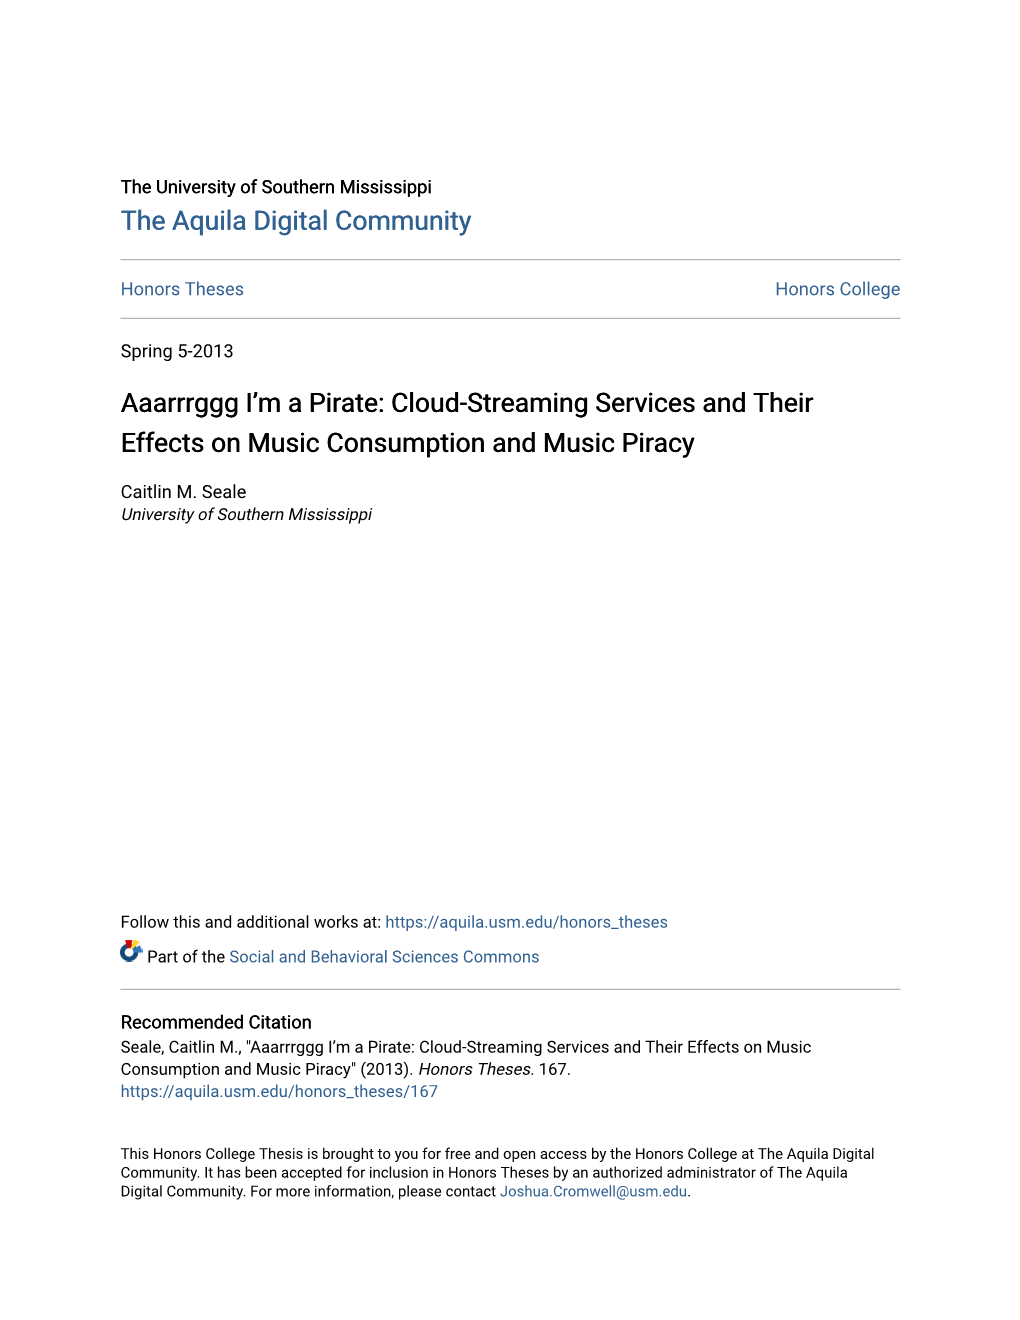 Cloud-Streaming Services and Their Effects on Music Consumption and Music Piracy